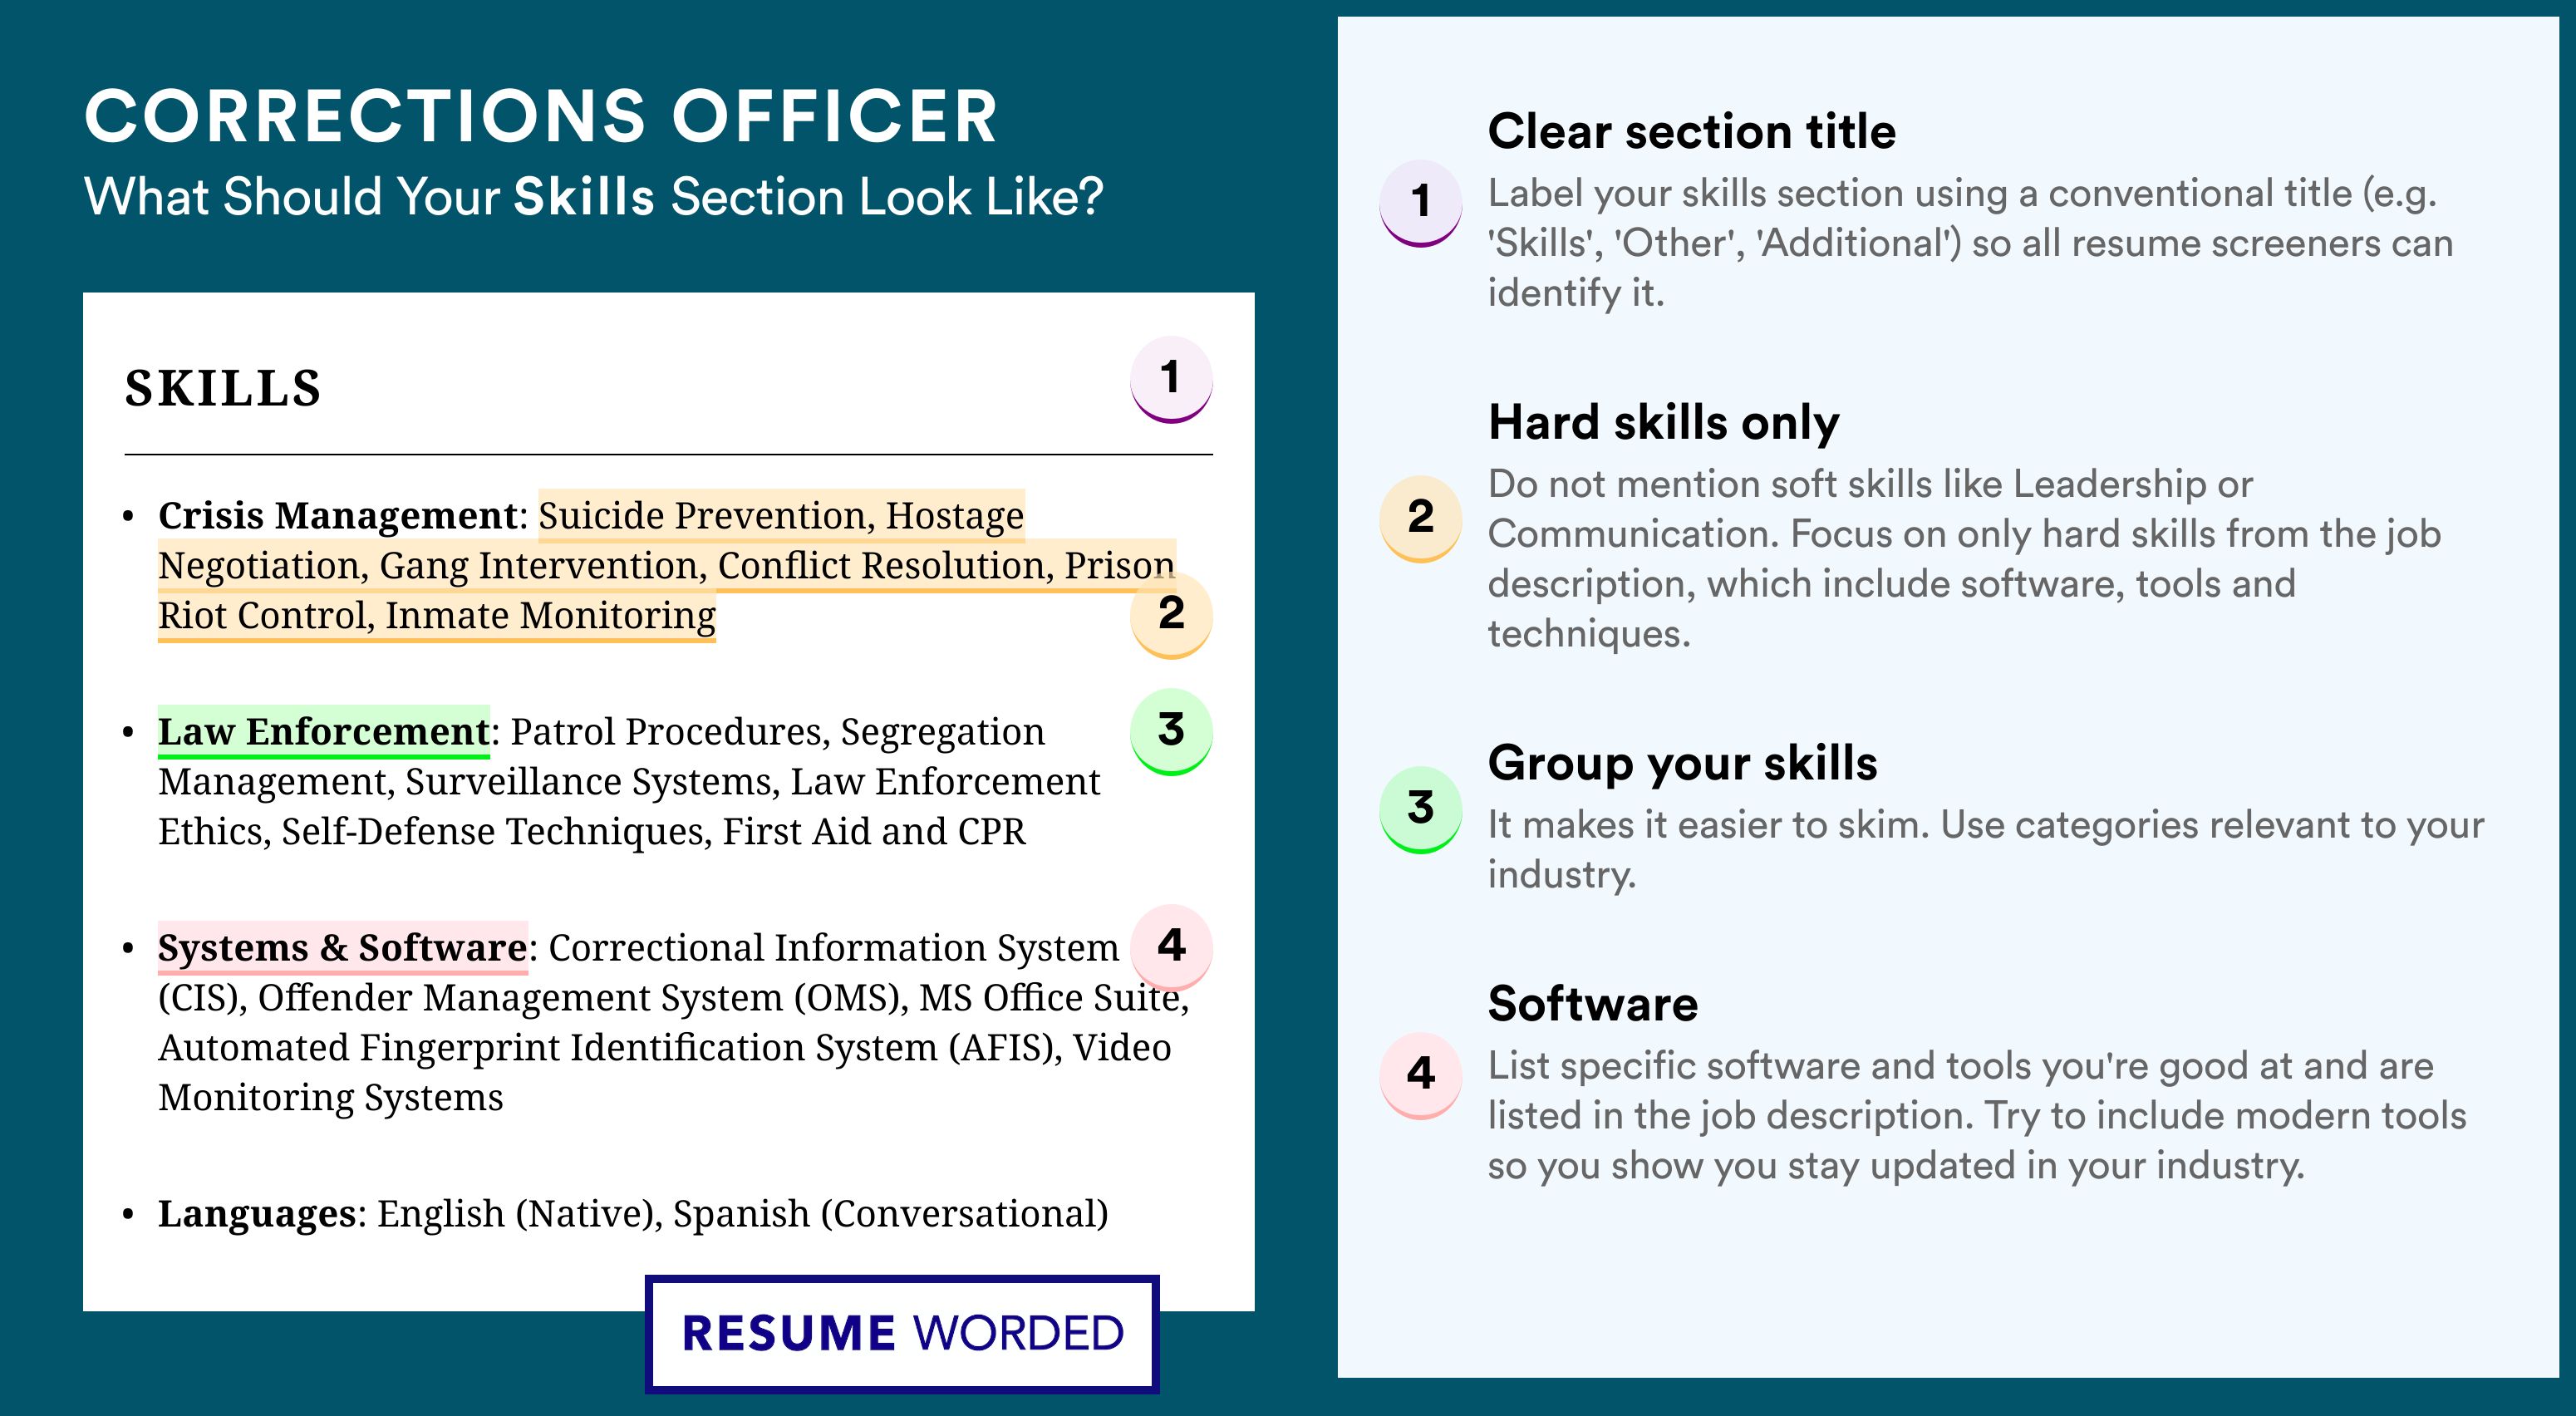 How To Write Your Skills Section - Corrections Officer Roles